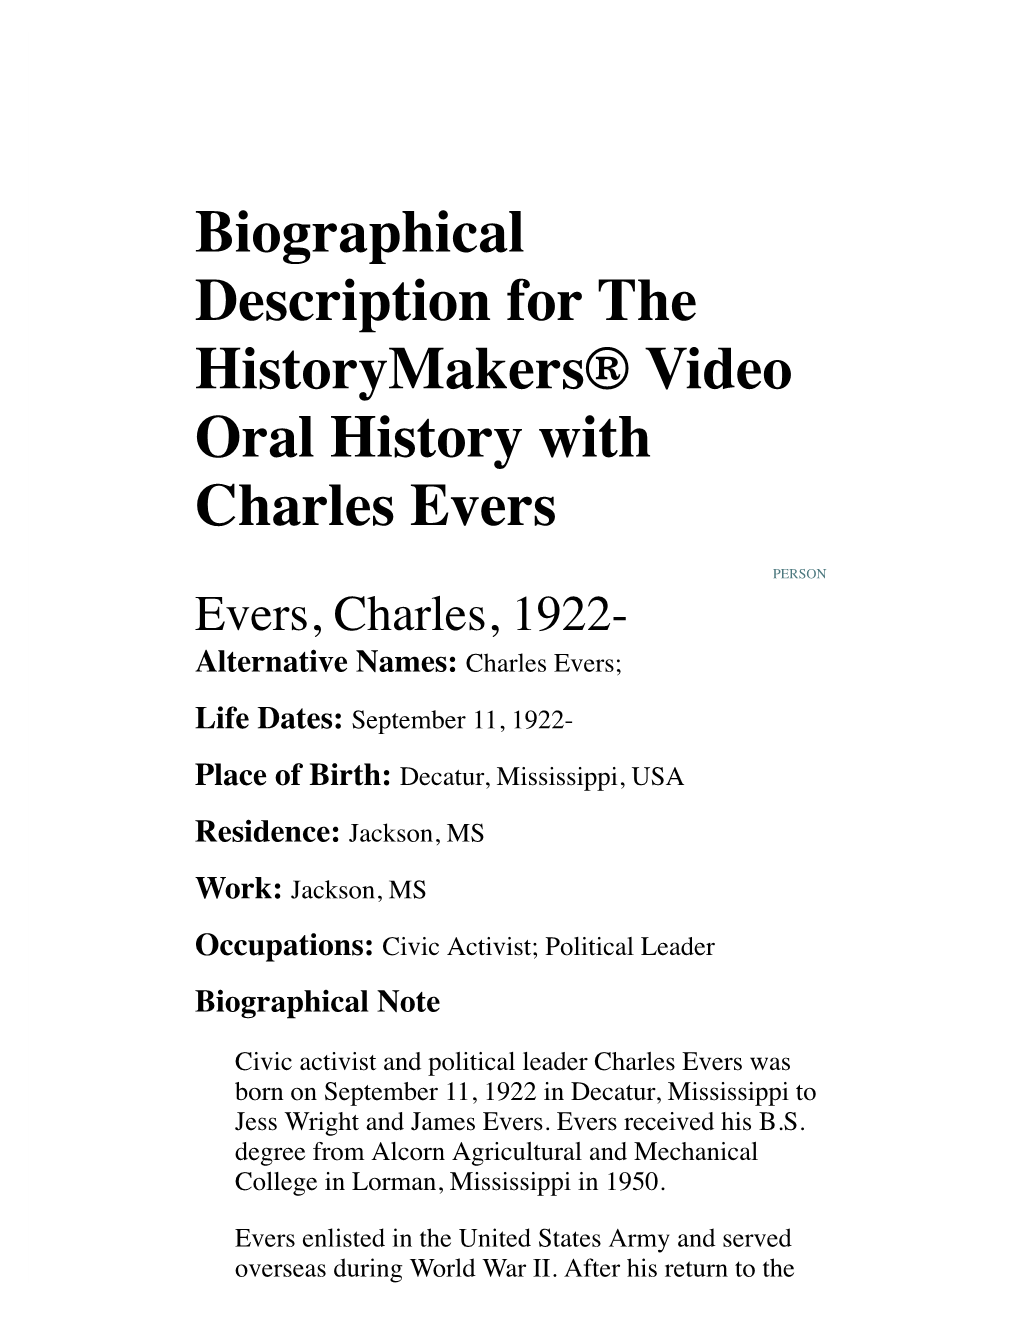 Biographical Description for the Historymakers® Video Oral History with Charles Evers